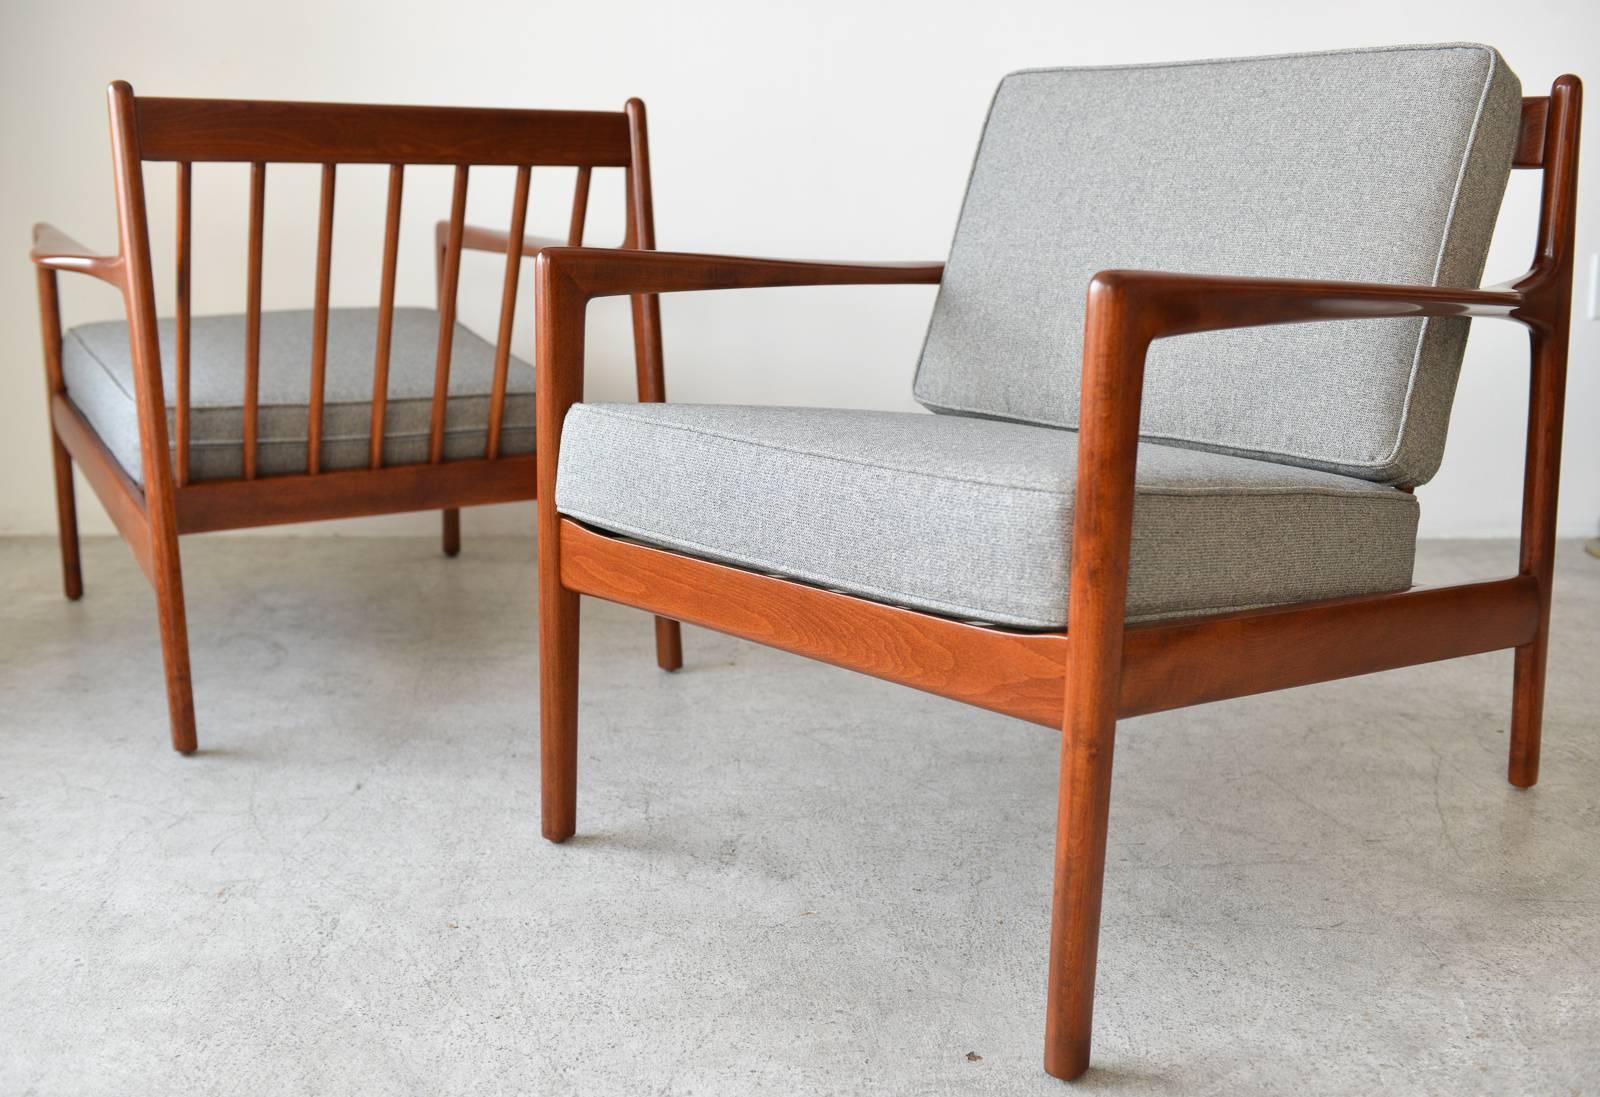 Swedish Pair of Walnut Lounge Chairs by Folke Ohlsson for DUX, Sweden, circa 1960